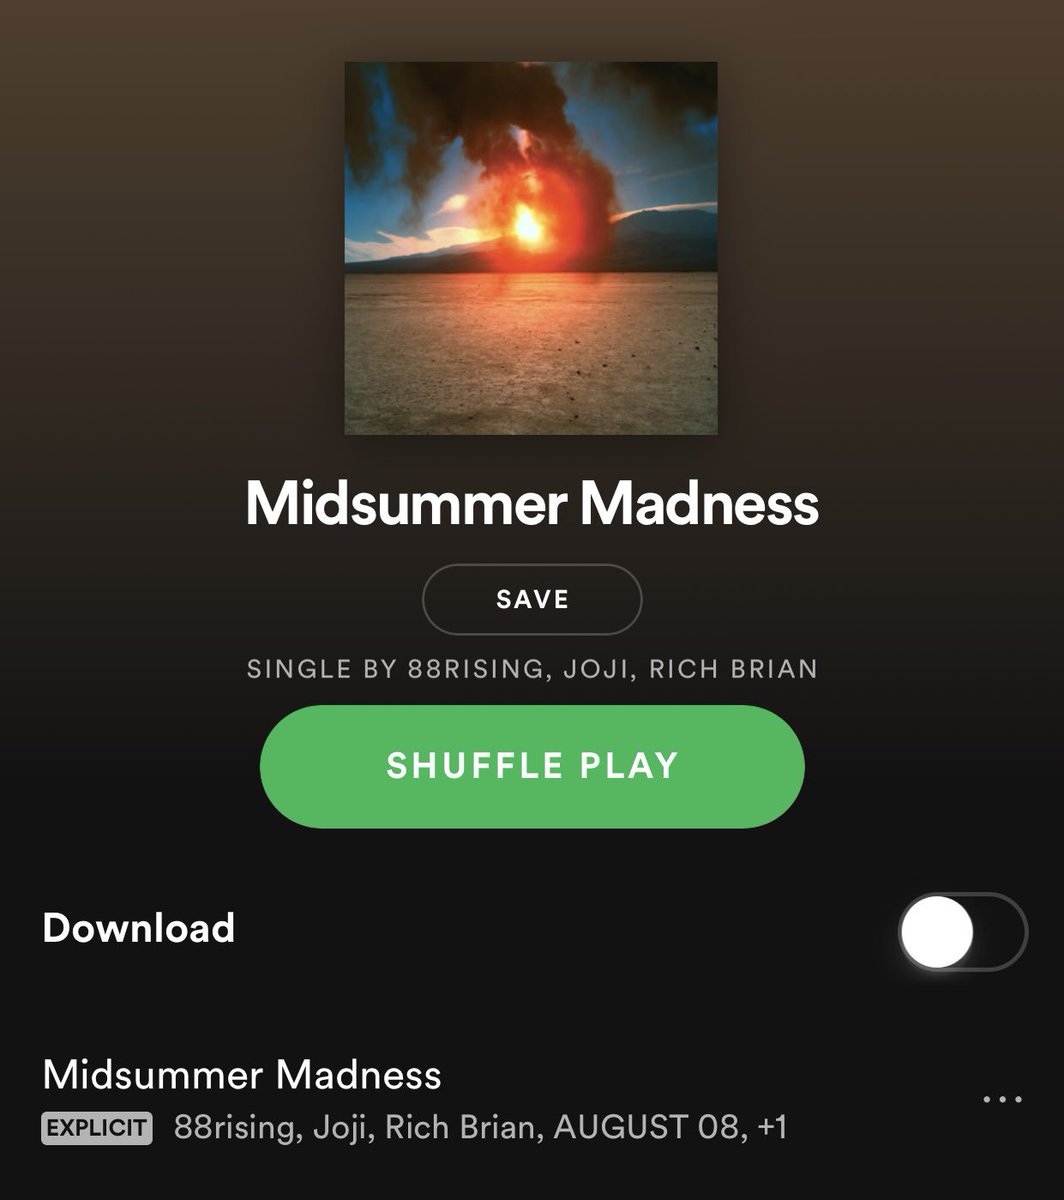 “MIDSUMMER MADNESS” out now. kiss somebody to this for me. on the lips.